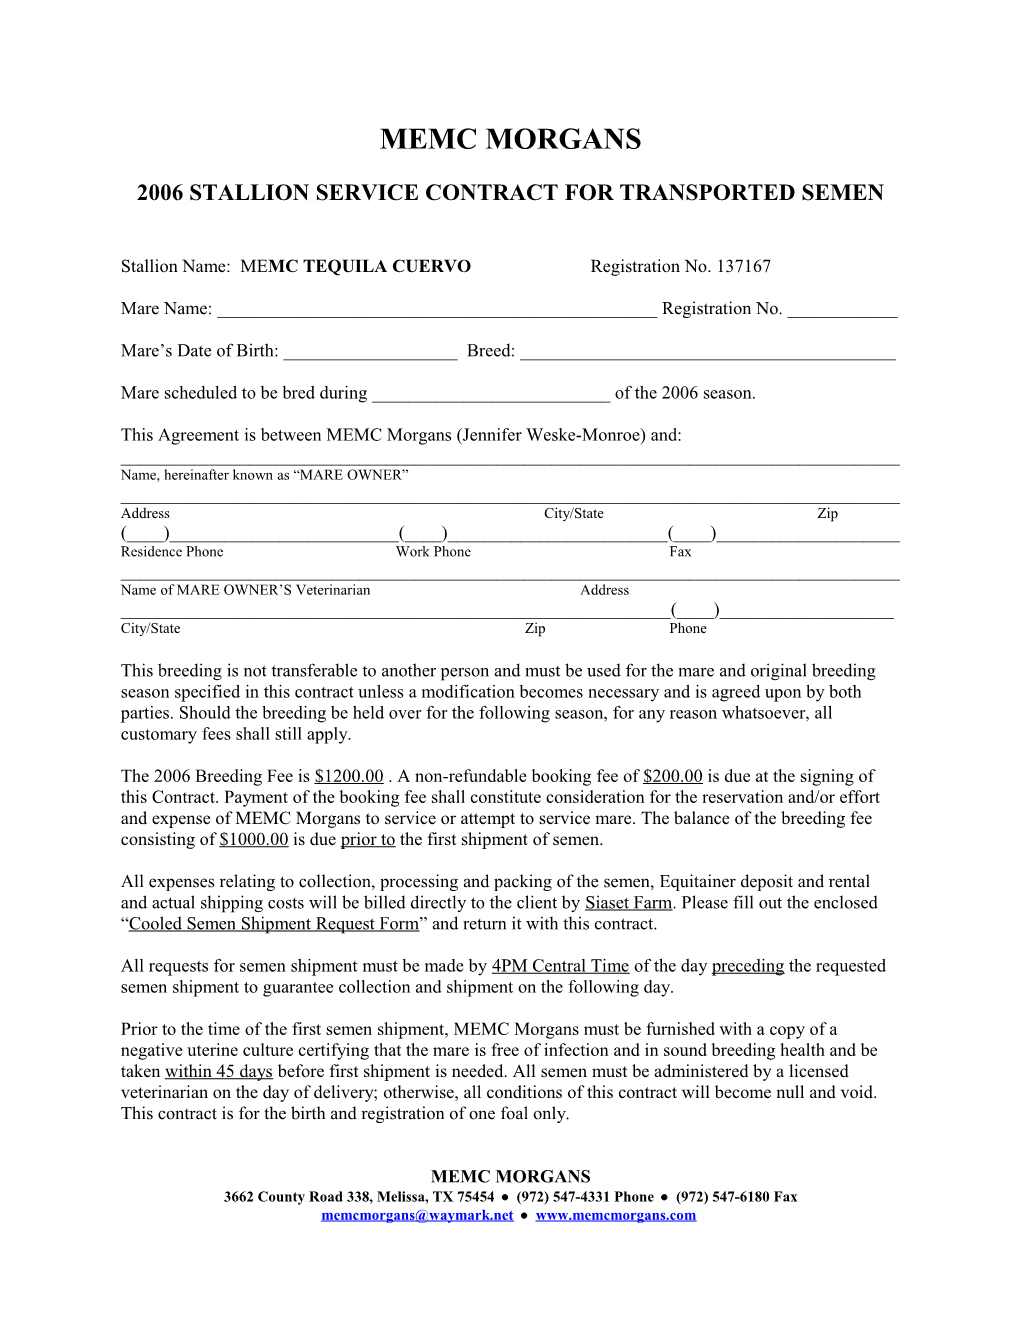 2006 Stallion Service Contract for Transported Semen